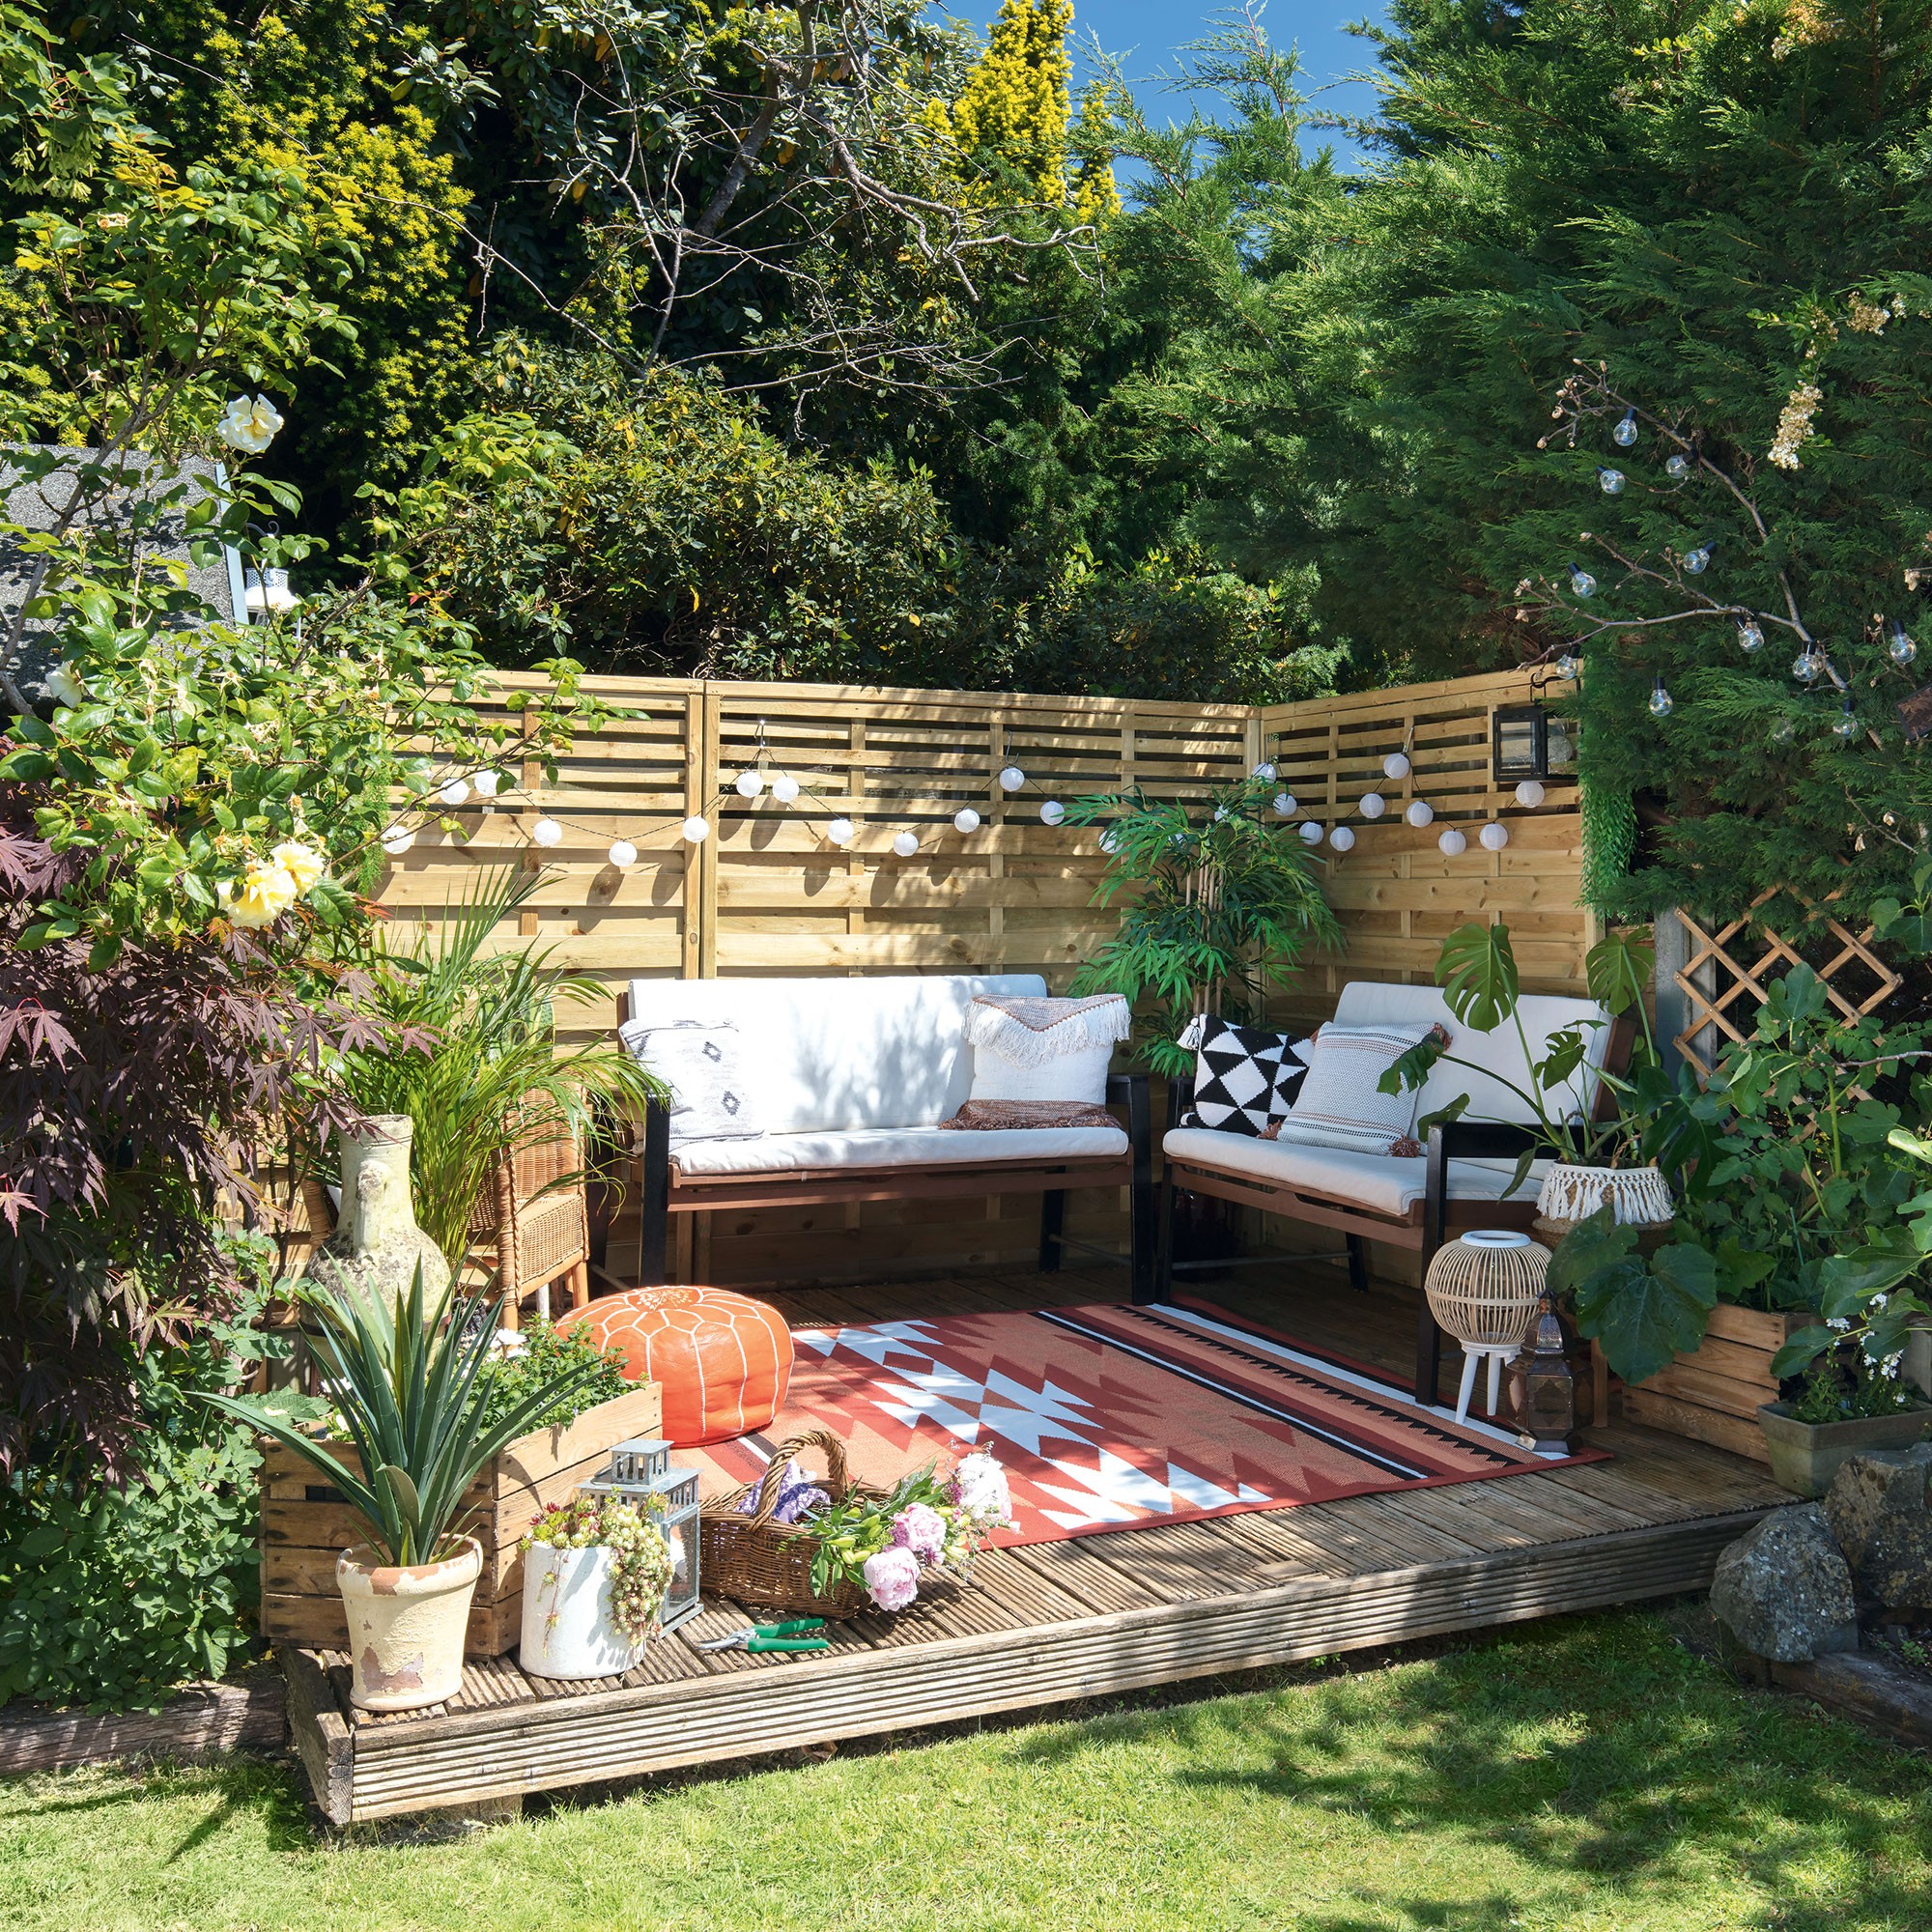 Small garden ideas to make the most of your outdoor space | Ideal Home